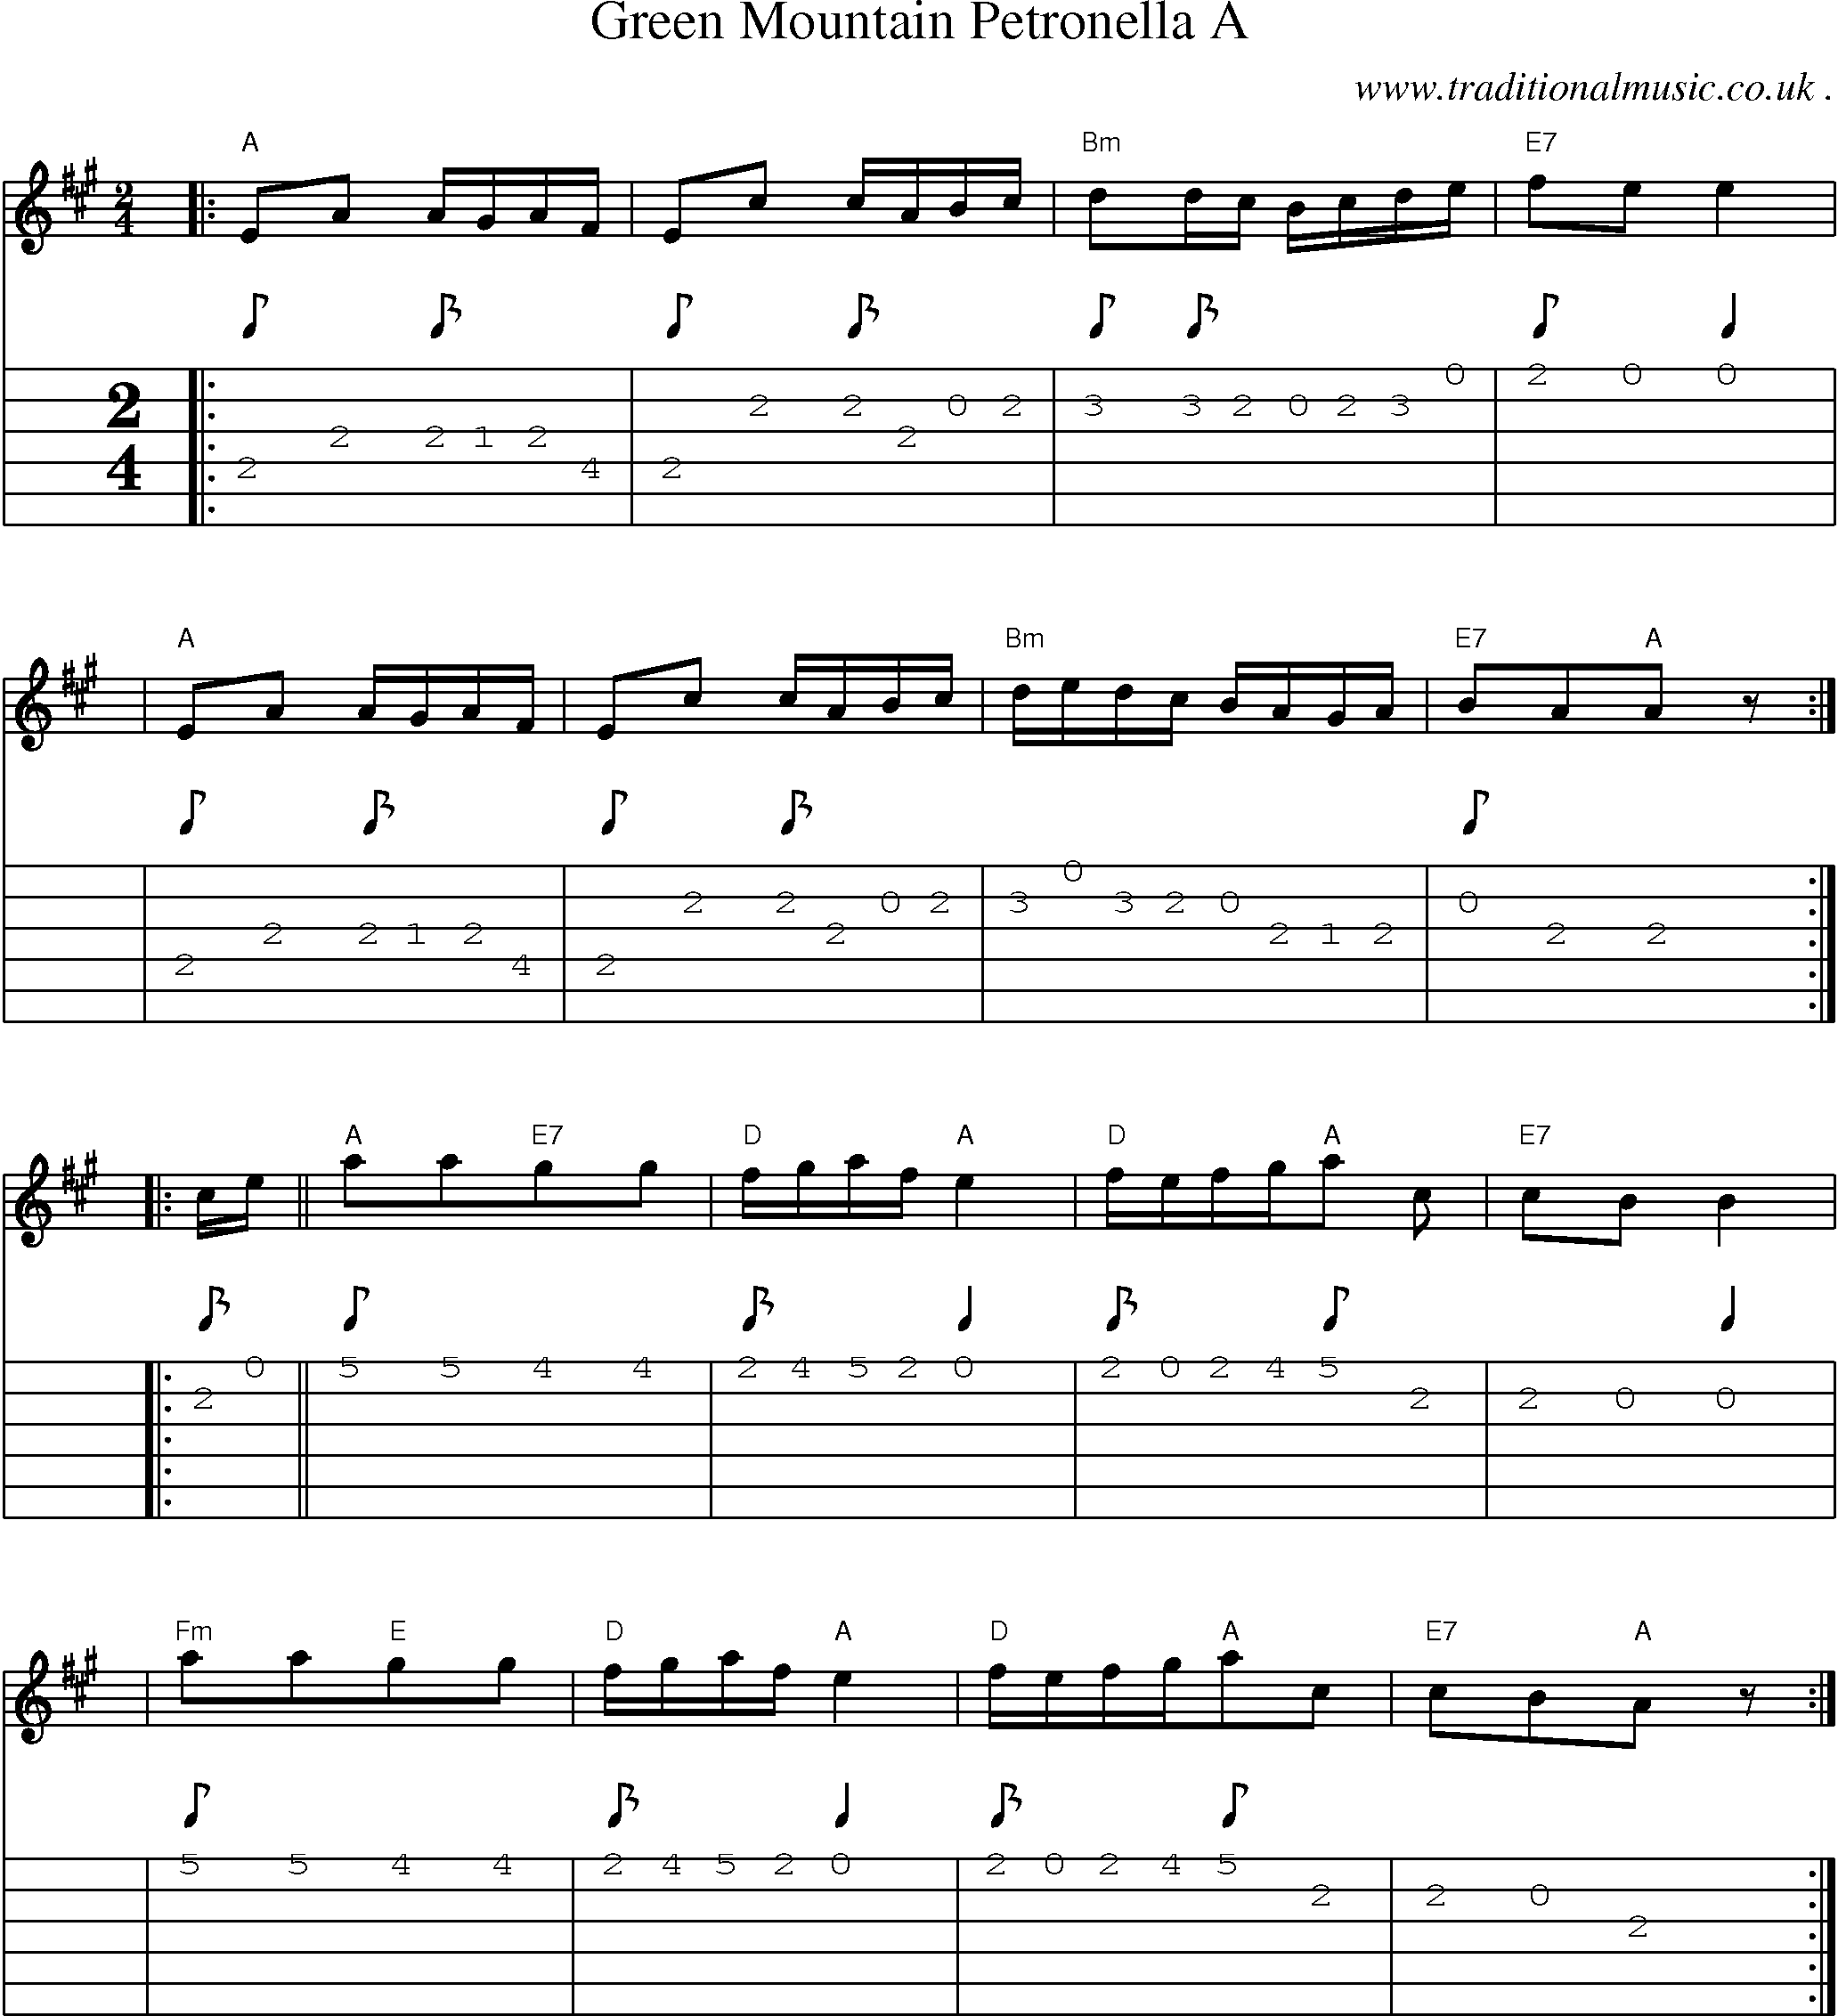 Sheet-Music and Guitar Tabs for Green Mountain Petronella A